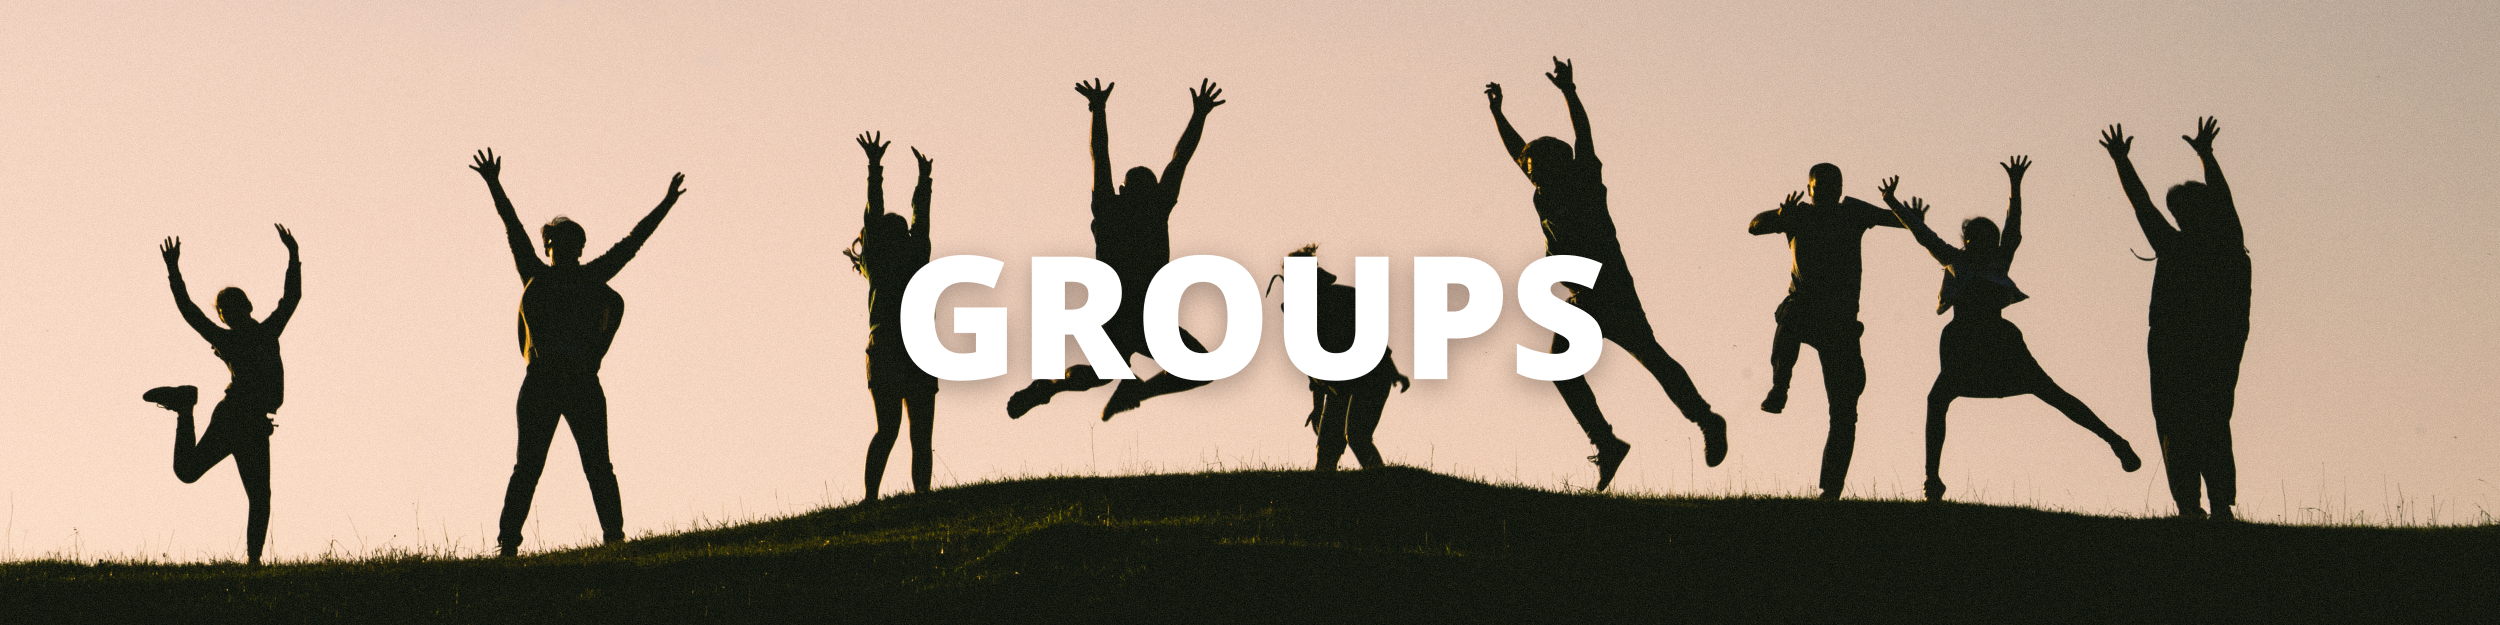 Image is a silhouette of 9 people with their arms in the air. Some are jumping. The word "groups" is visible in white text over the image.